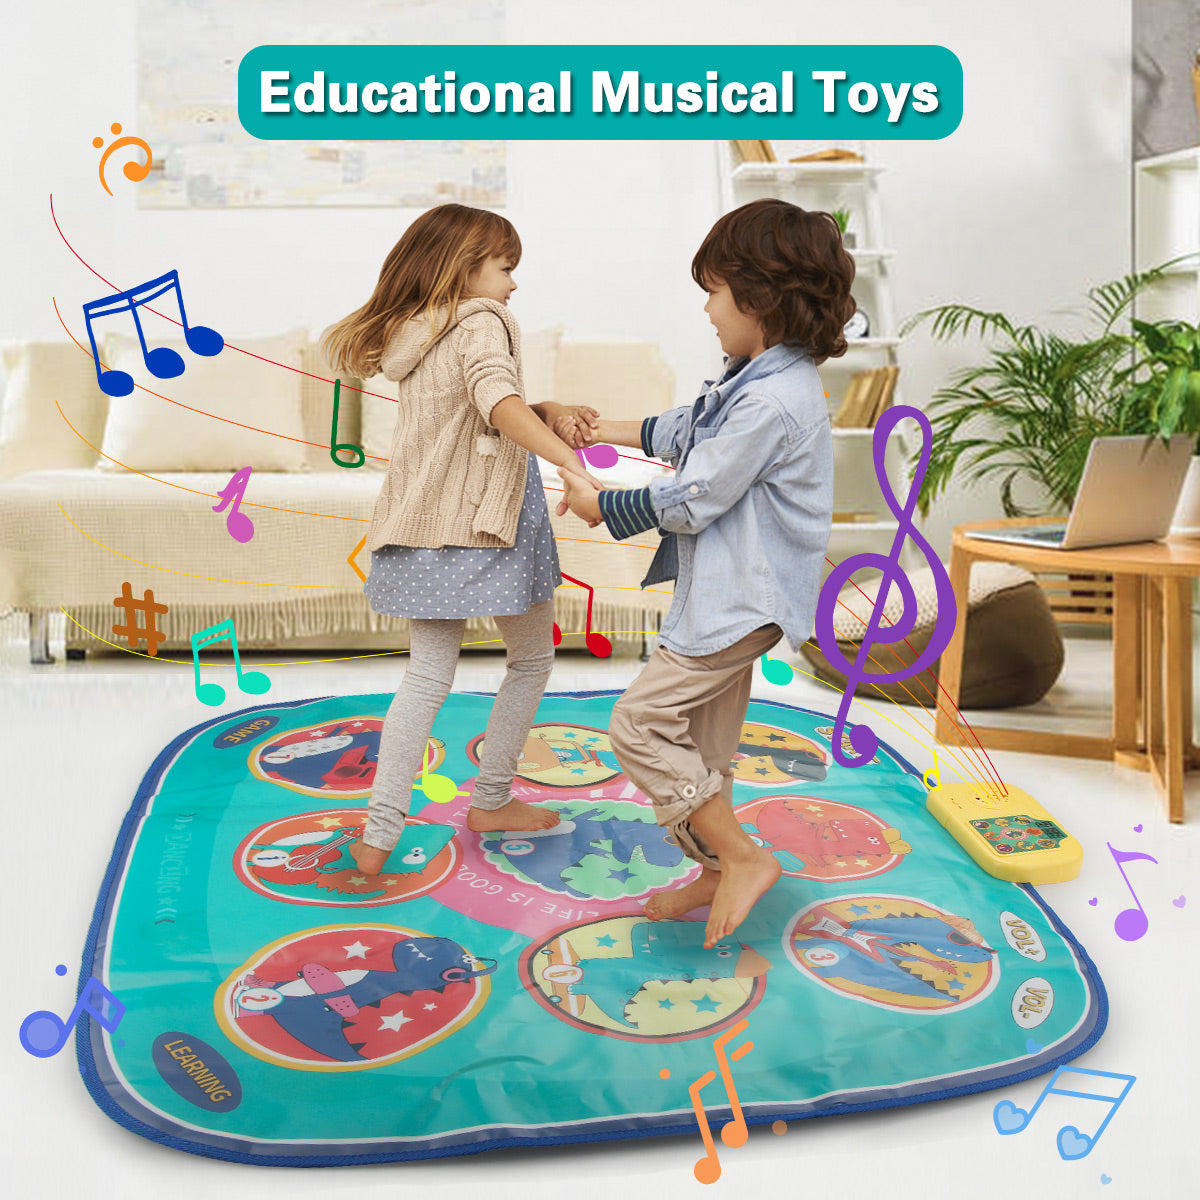 Joyfia Dance Mat, Dance Game Toy for Ages 3-10+ Kids Girls Boys, 3 Modes Electronic Musical Playmat, 5 Challenge Levels, Adjustable Volume Dinosaur Dance Pad with LED Lights, Christmas Birthday Gift